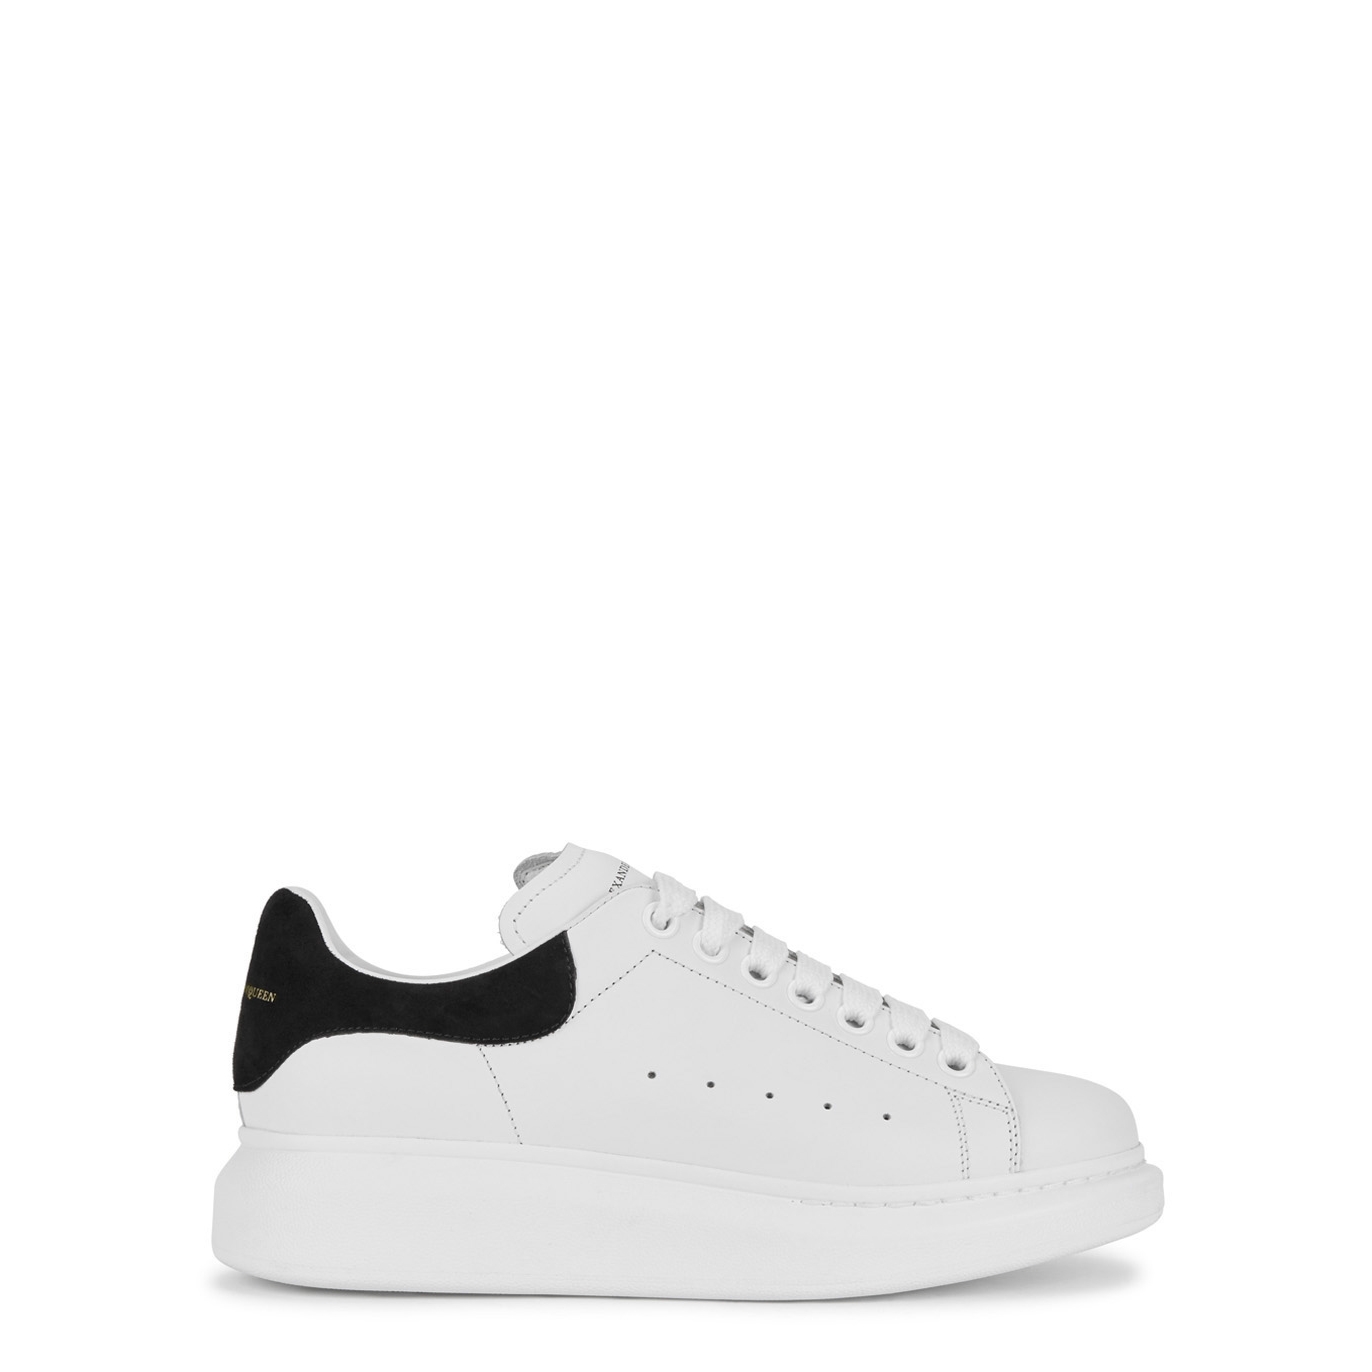 Alexander McQueen Oversized White Leather Sneakers - White And Black - 8